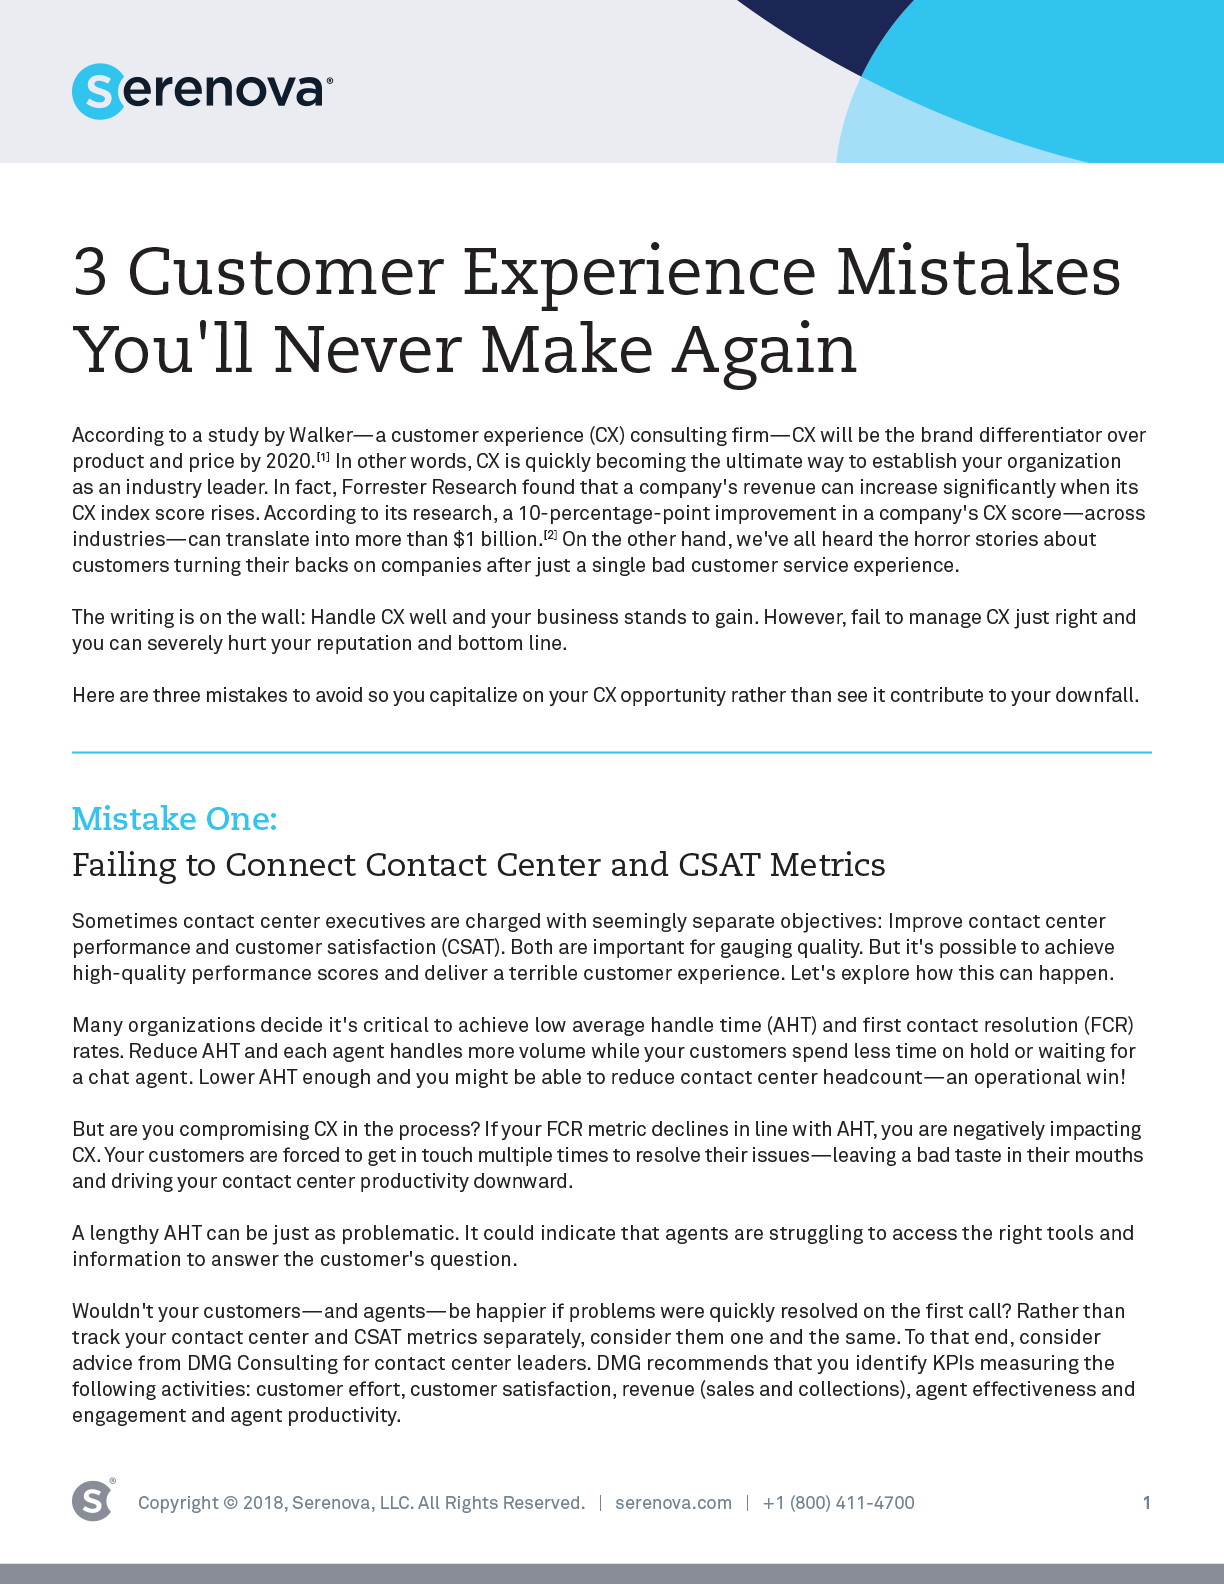 3_Customer_Experience_Mistakes_You_ll_Never_Make_Again